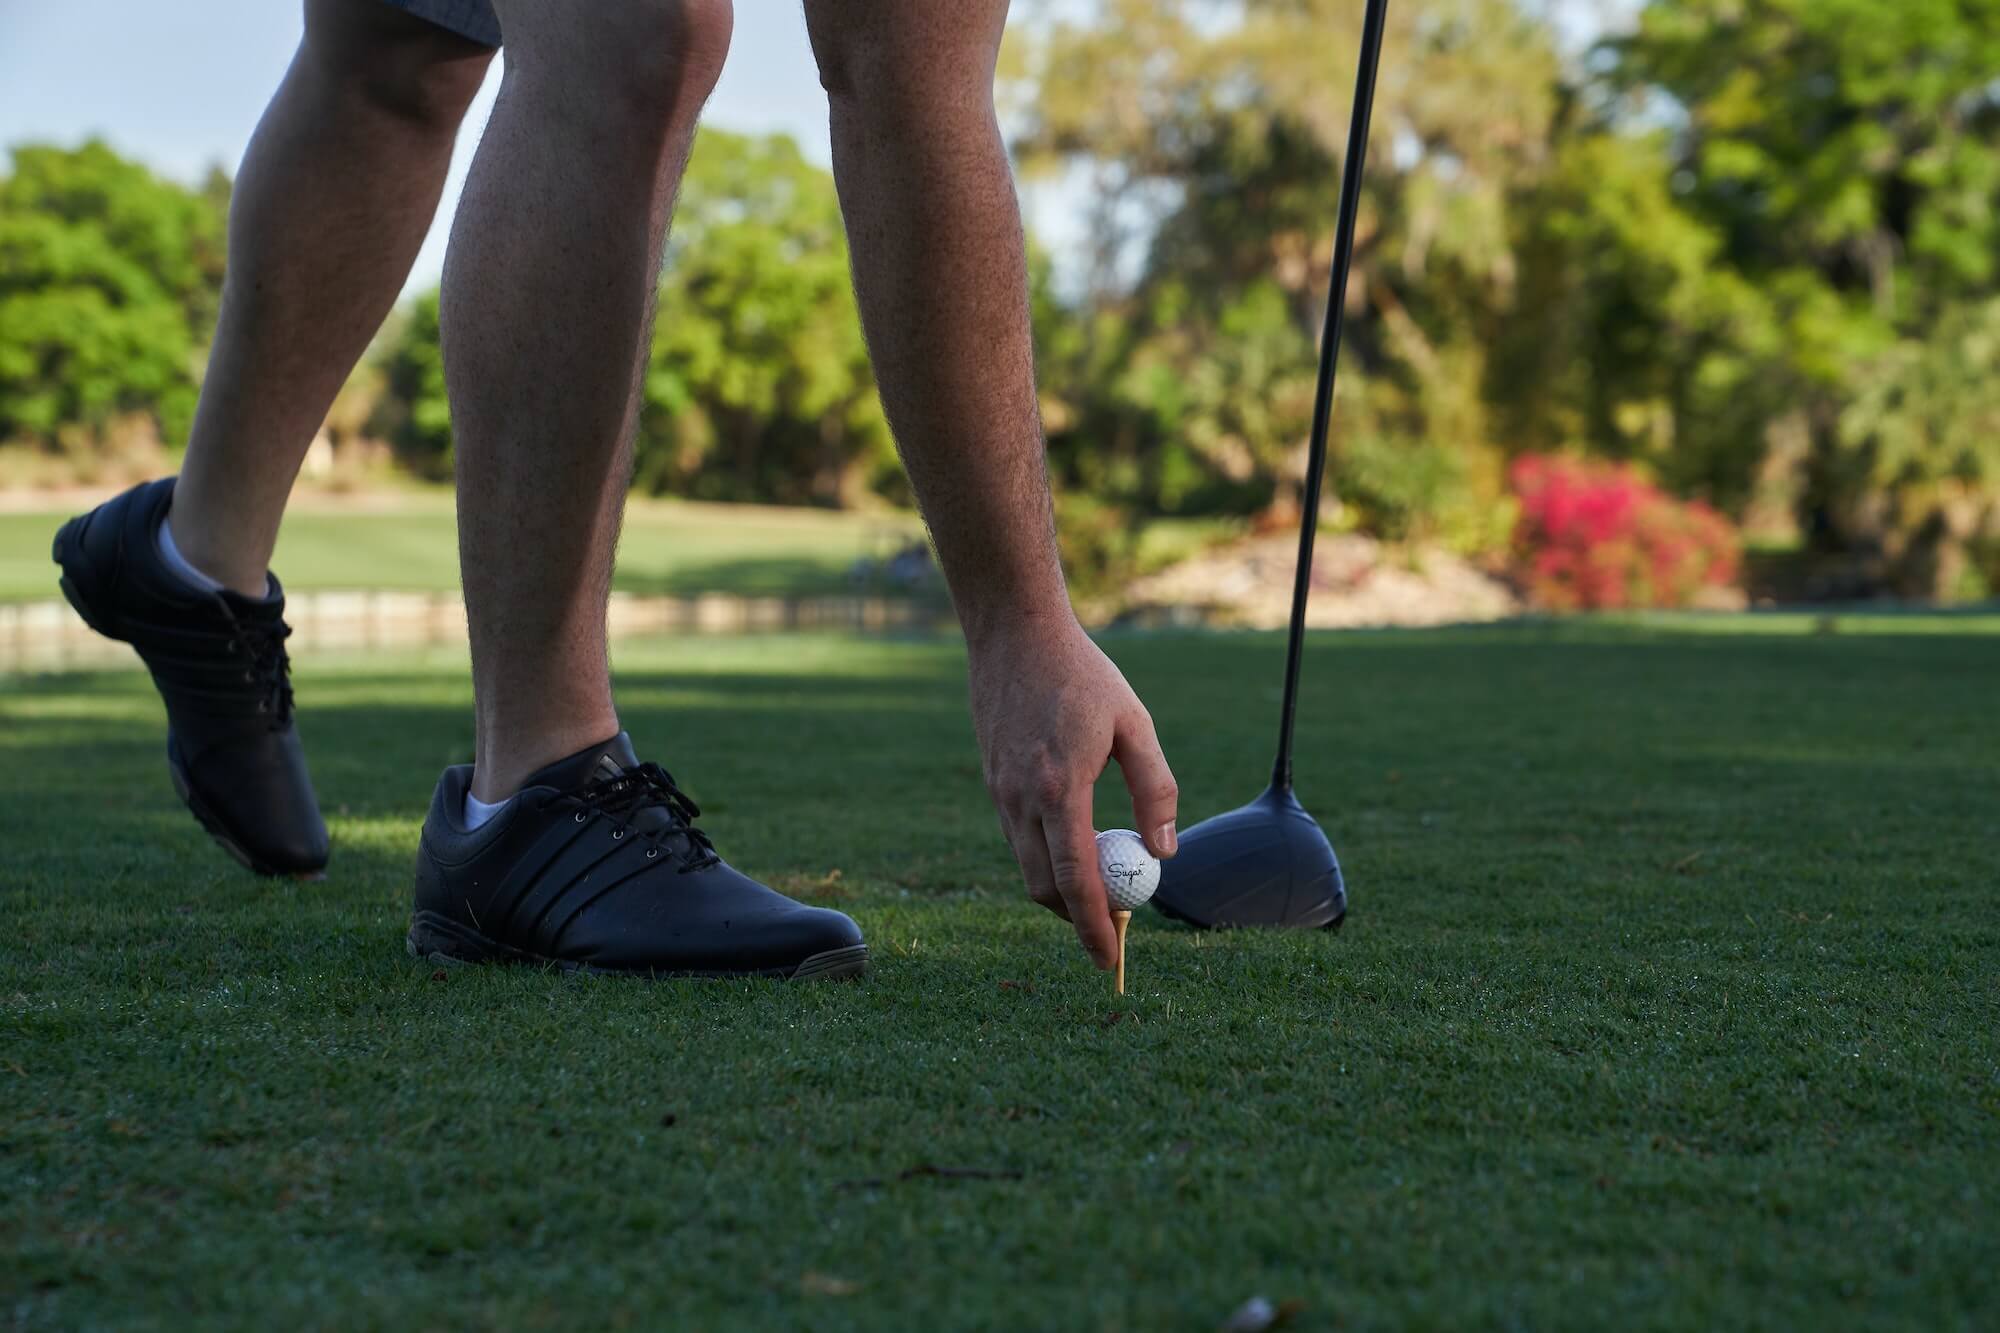 Man in golf shoes places golf ball on tee